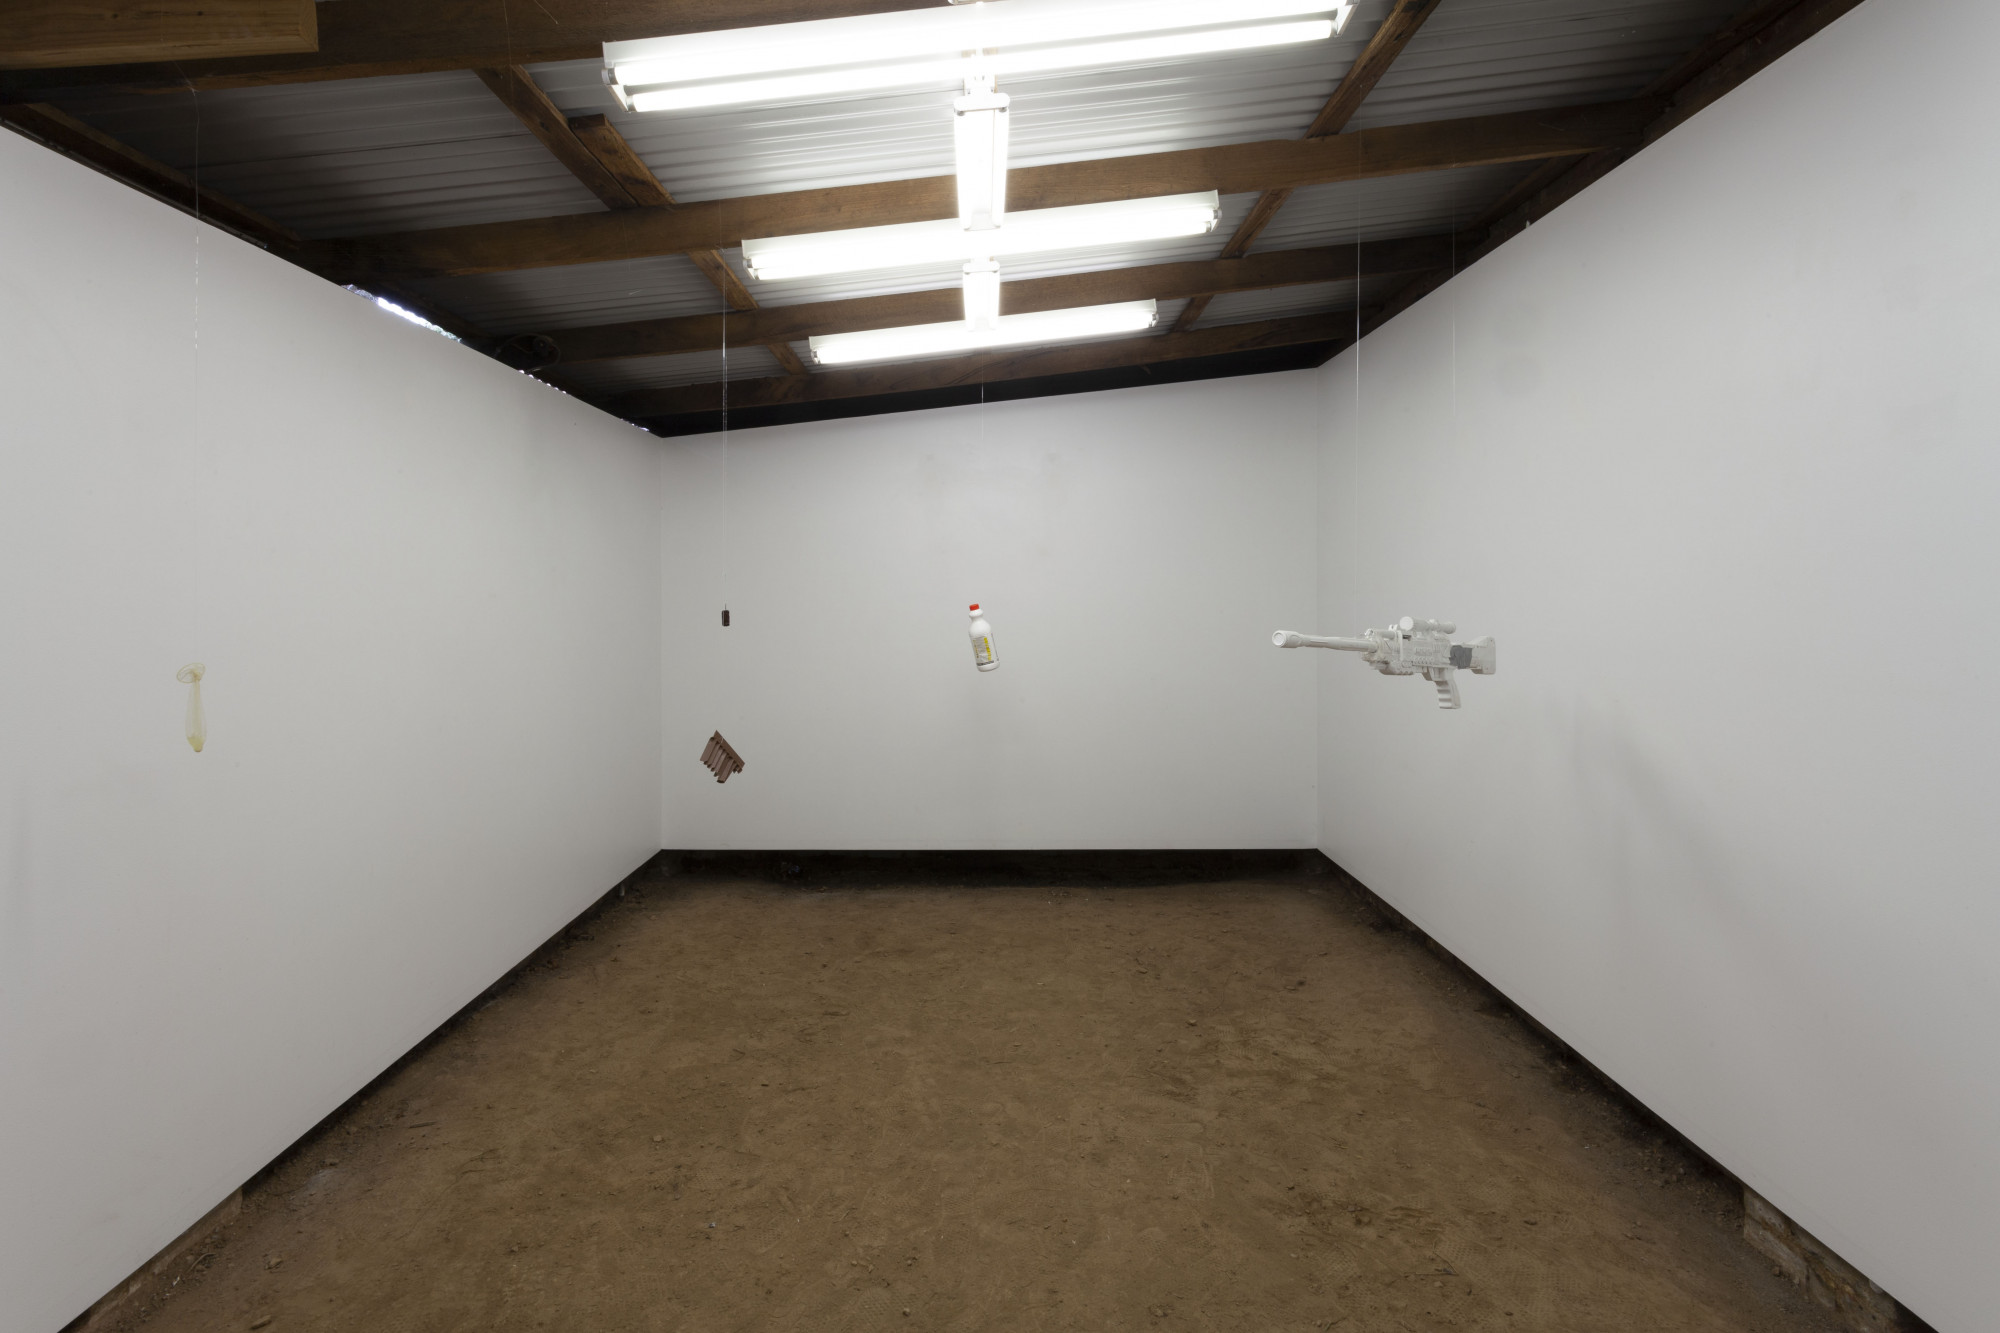 Installation view of John McCrackpipe and Alex Vivian, <em>First Person Shooter</em>, 5 September 2021, Guzzler. Used condom, broken vent guard, used tampon, bleach bottle, painted gun with tape. Photo: Courtesy of the artists.